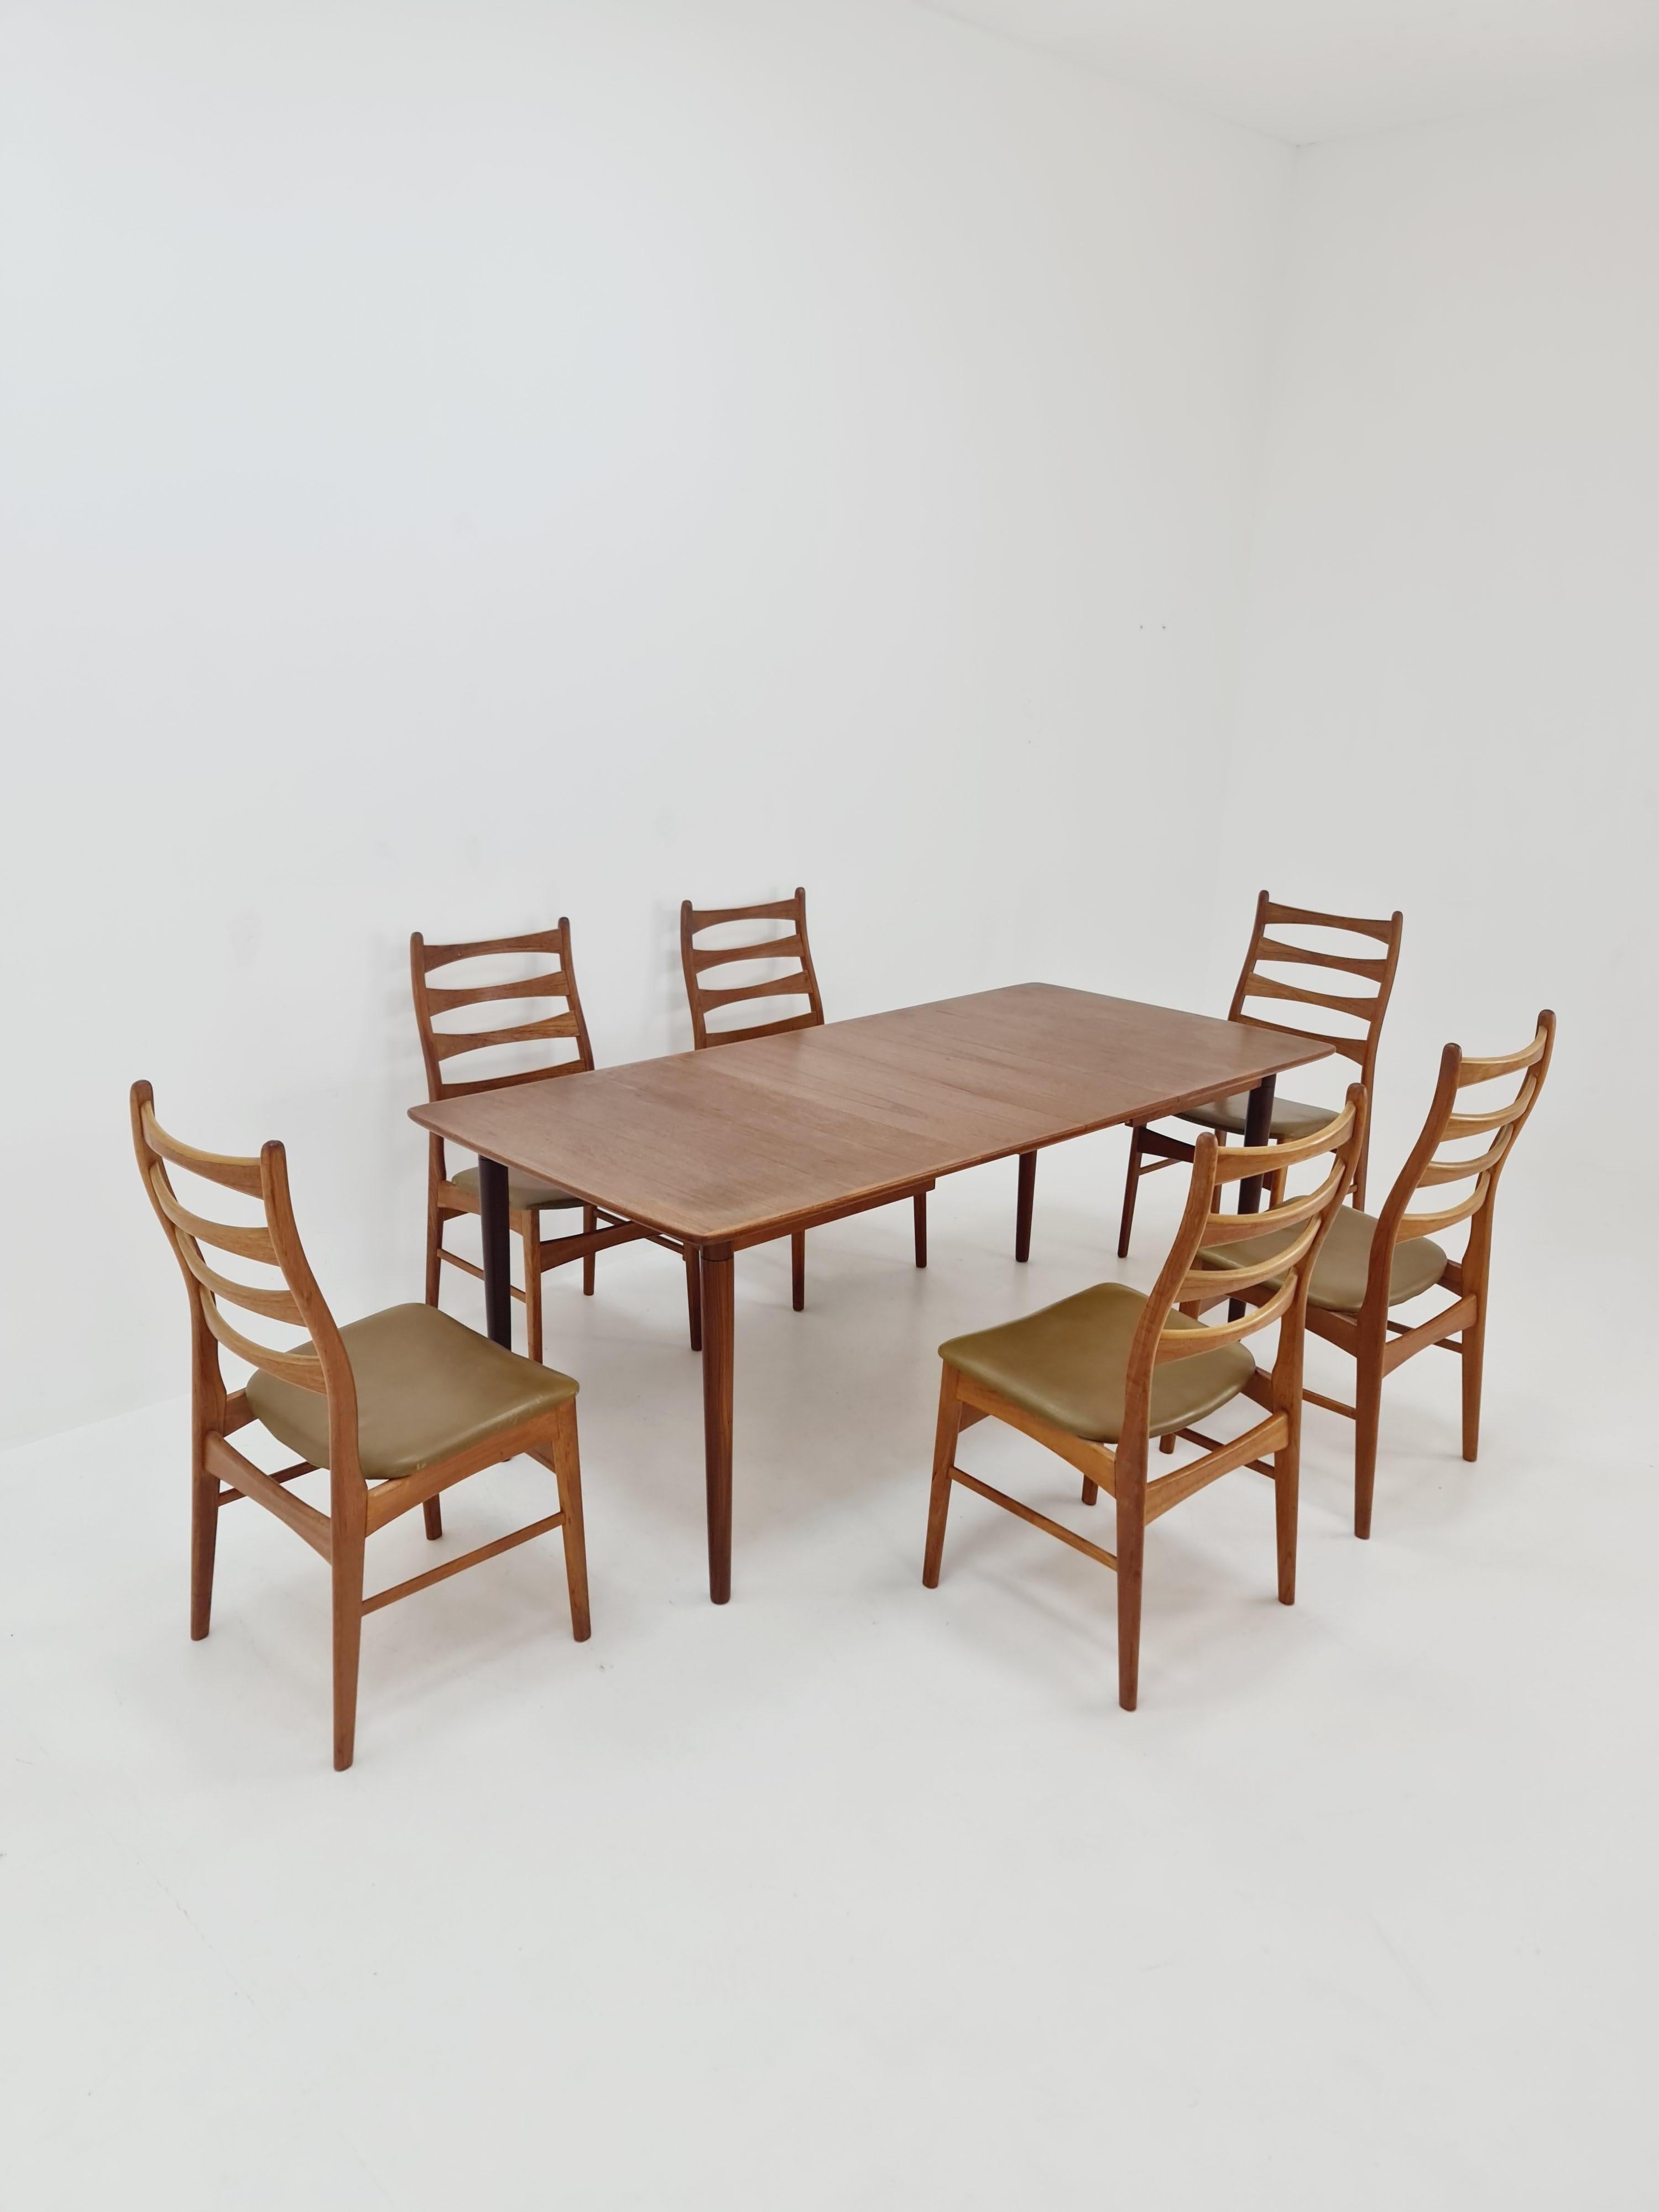 Danish teak with leather sits dining chairs by Viborg stolfabrik  1960s, set of 6


The chair frames are made from solid teak and and are in great condition.

Made in Denmark in the 60s

Dimensions:
Width: 44  cm
Depth: 42 cm
Height: 92  cm
Seat